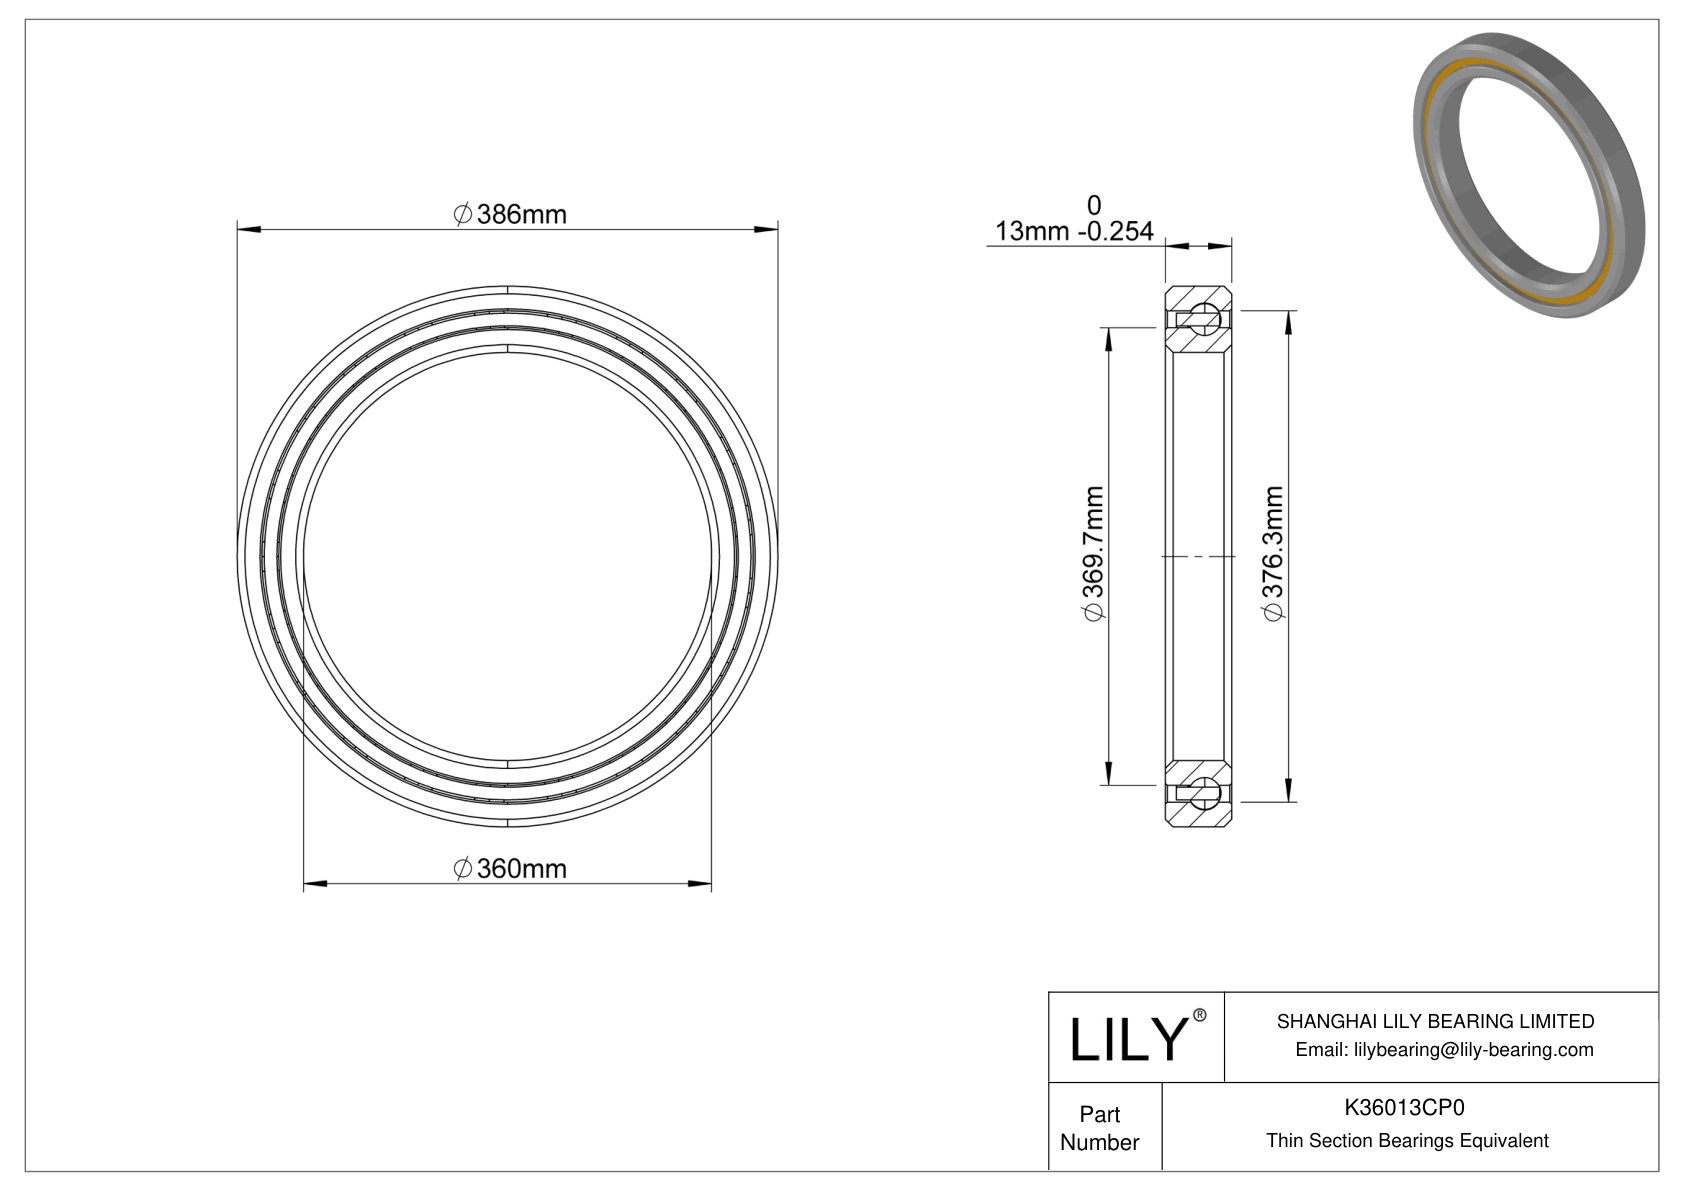 K36013CP0 Constant Section (CS) Bearings cad drawing